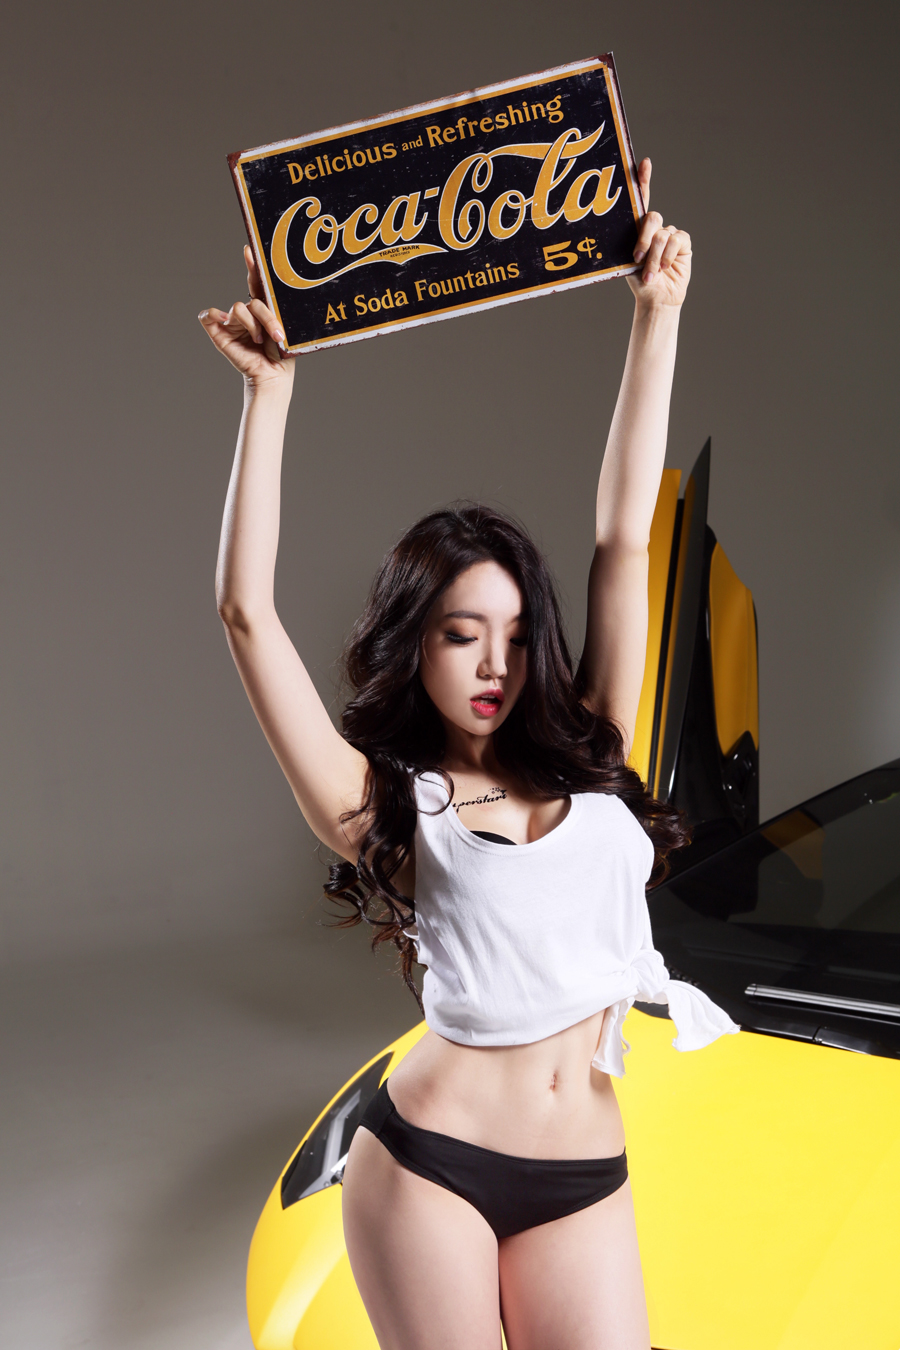 Kpop Idol Drops Jaws With Her Voluminous Figure! | Daily K 